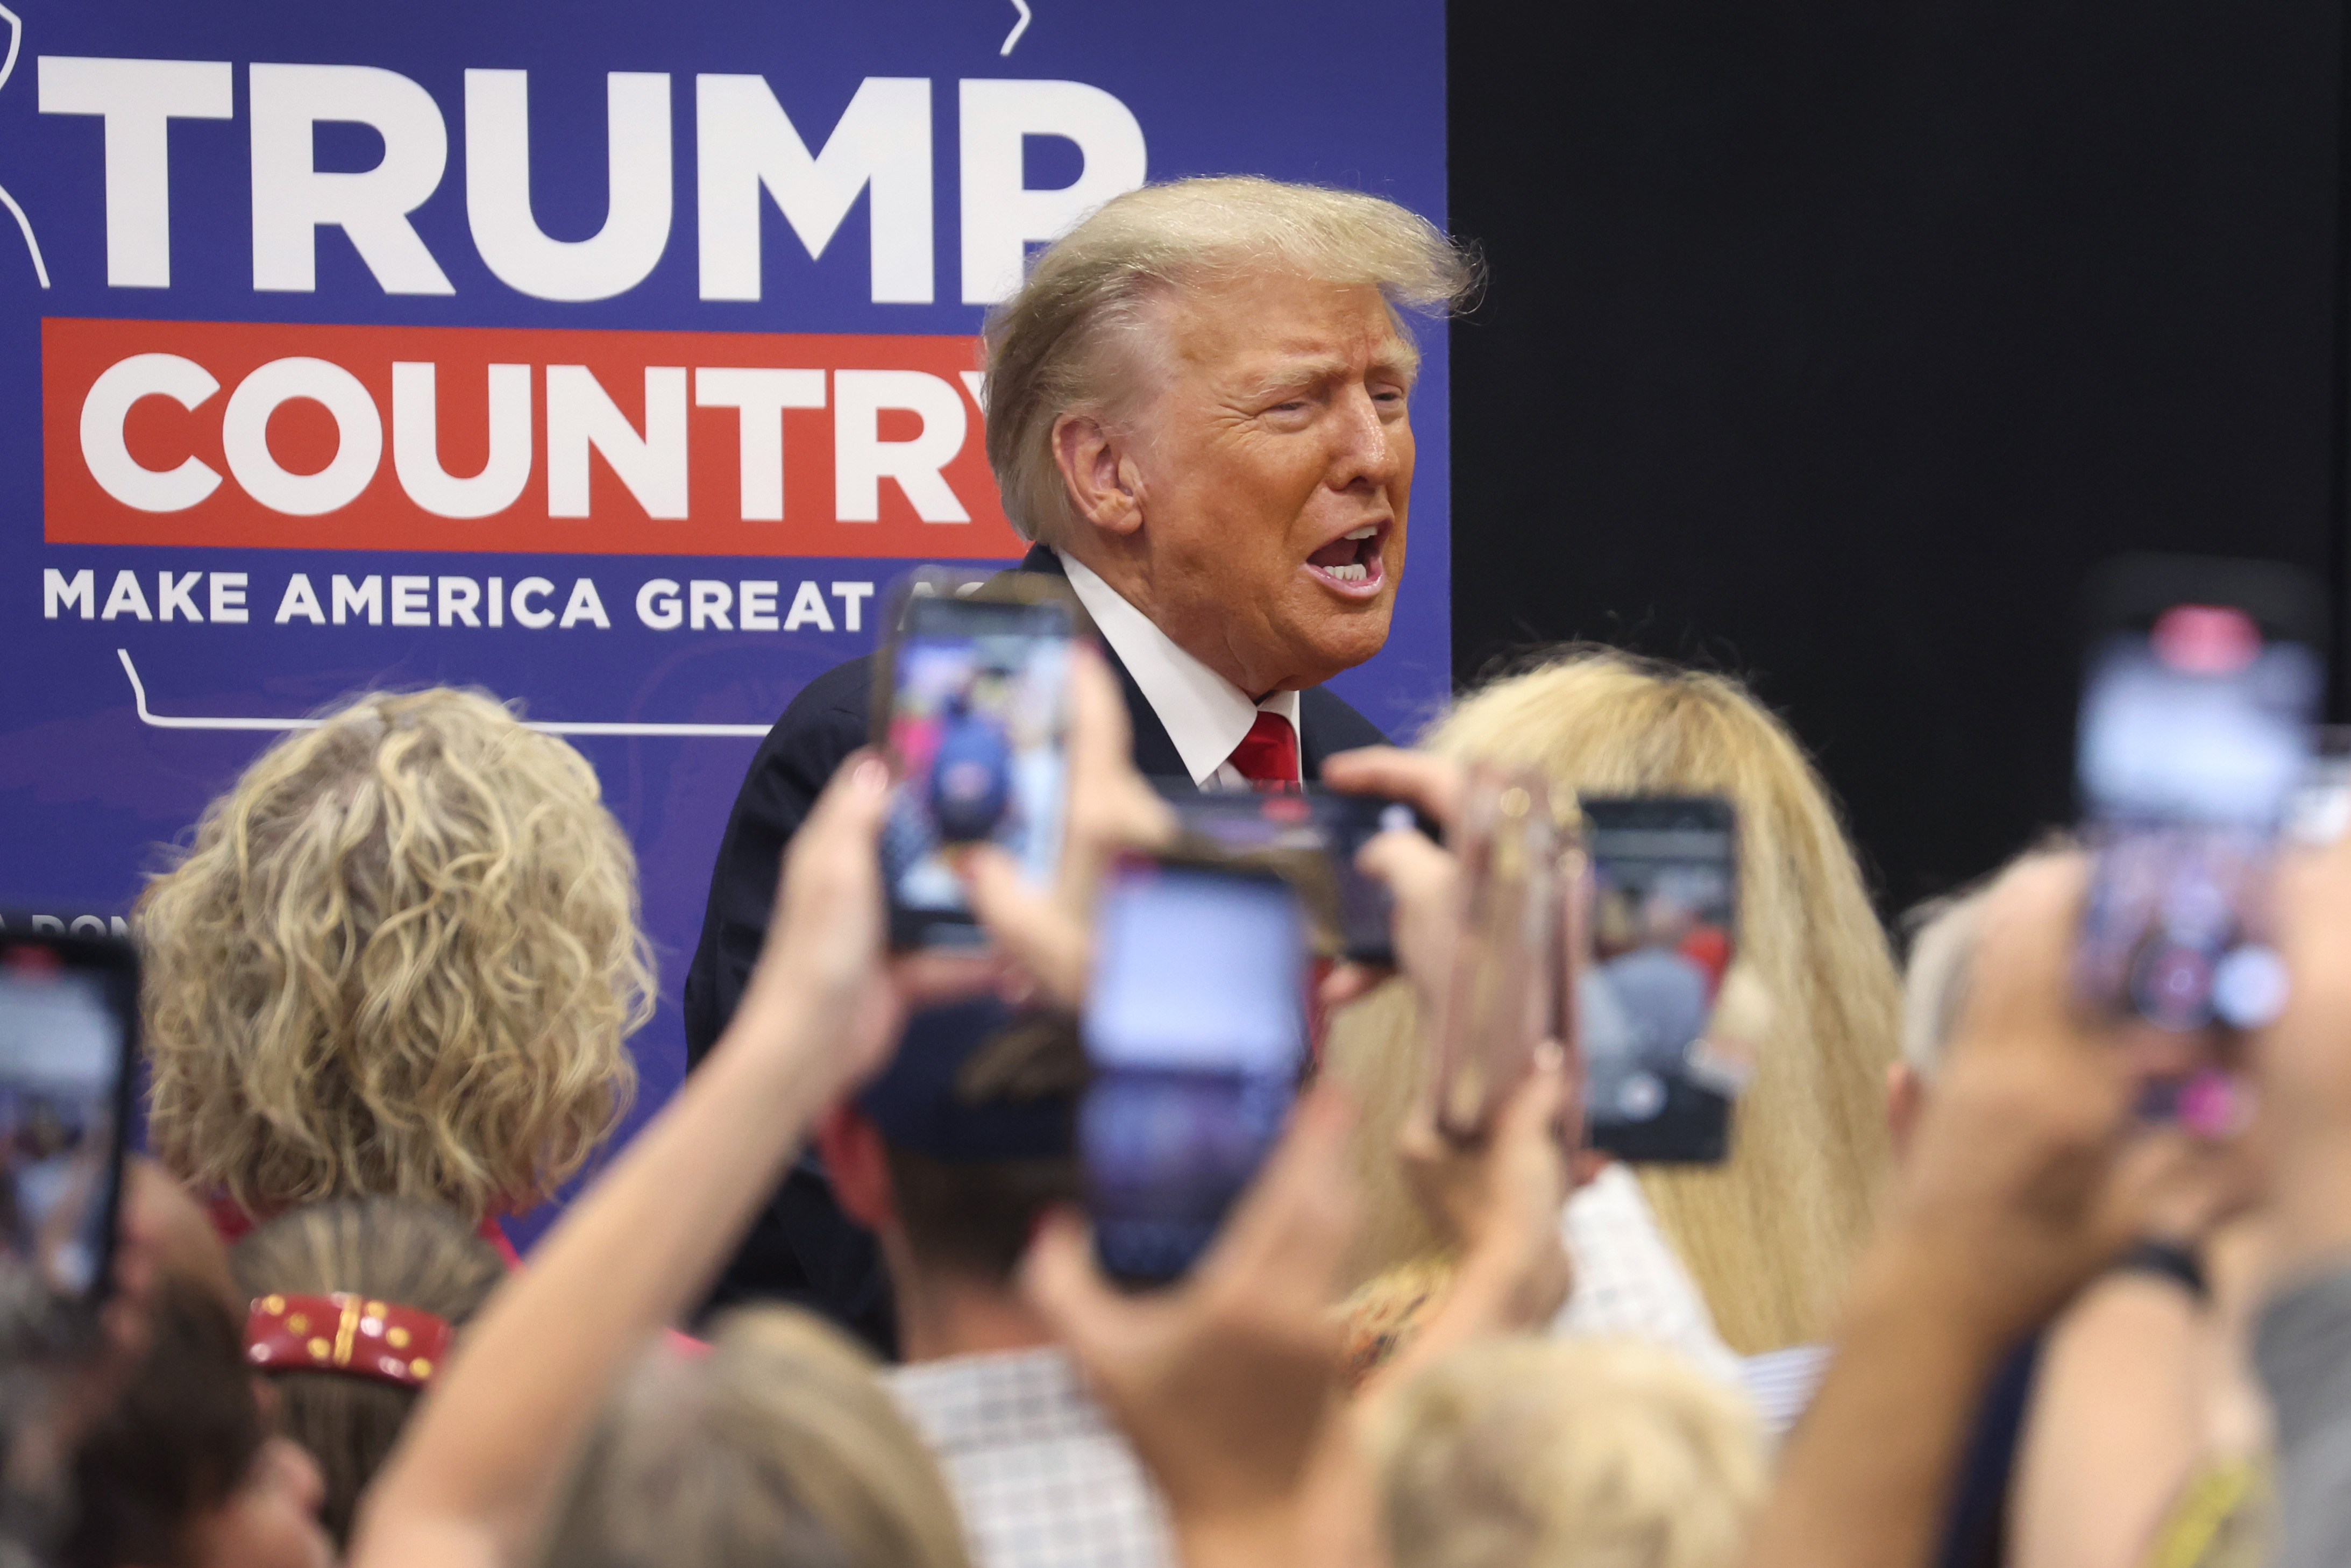 Donald Trump stands in front of campaign sign that says “Trump Country: Make America Great Again.” A crowd of onlookers take photos and videos with raised smartphones.